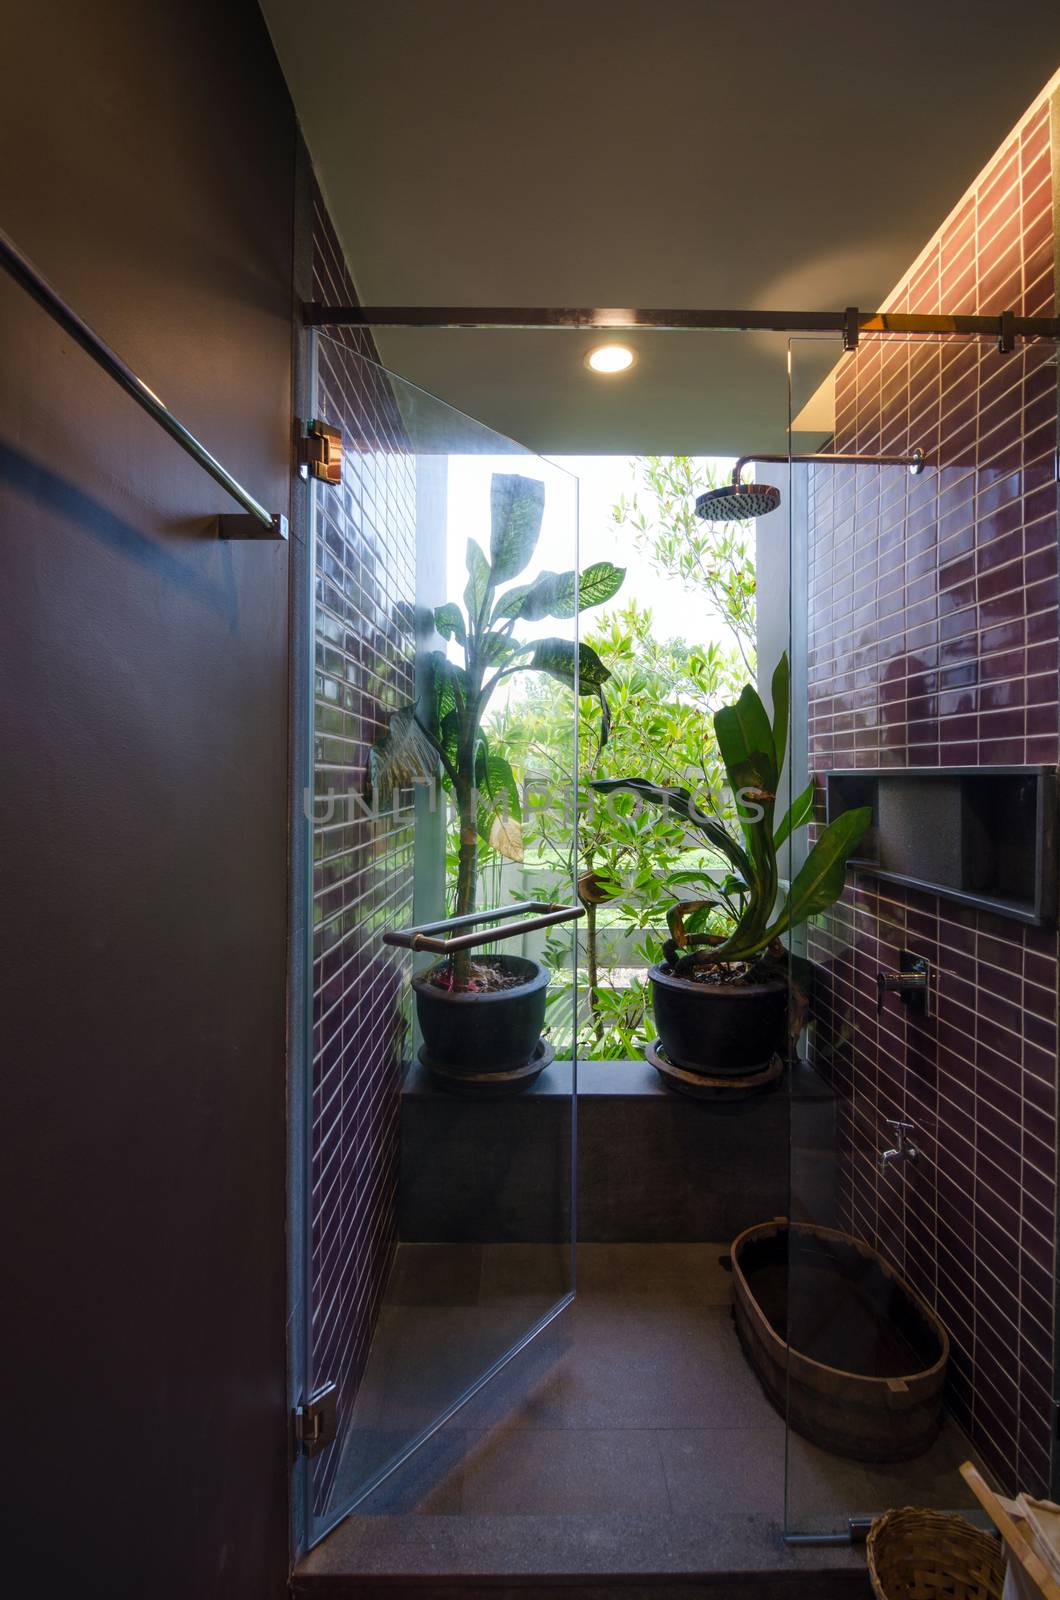 Shower Room with nature in a Tropical House